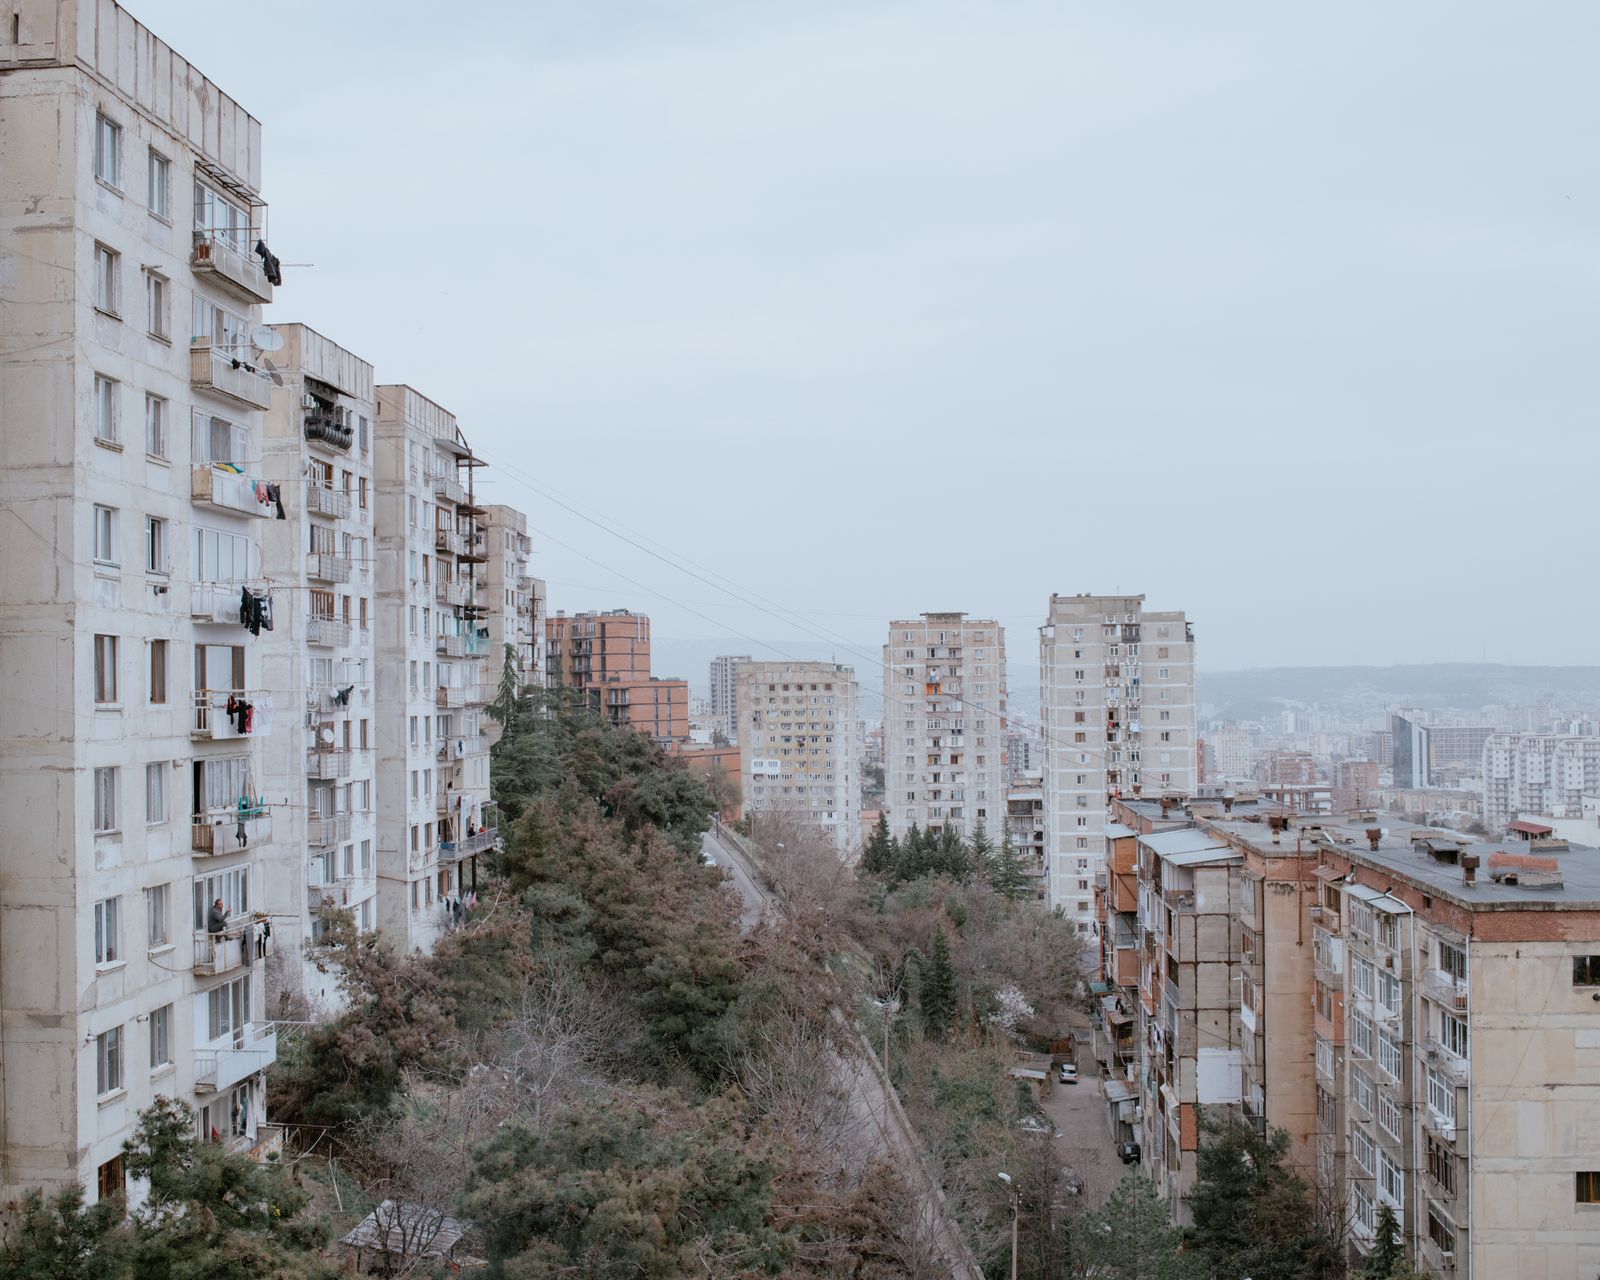 © Jana Islinger - Image from the Droa - Georgia on the move photography project